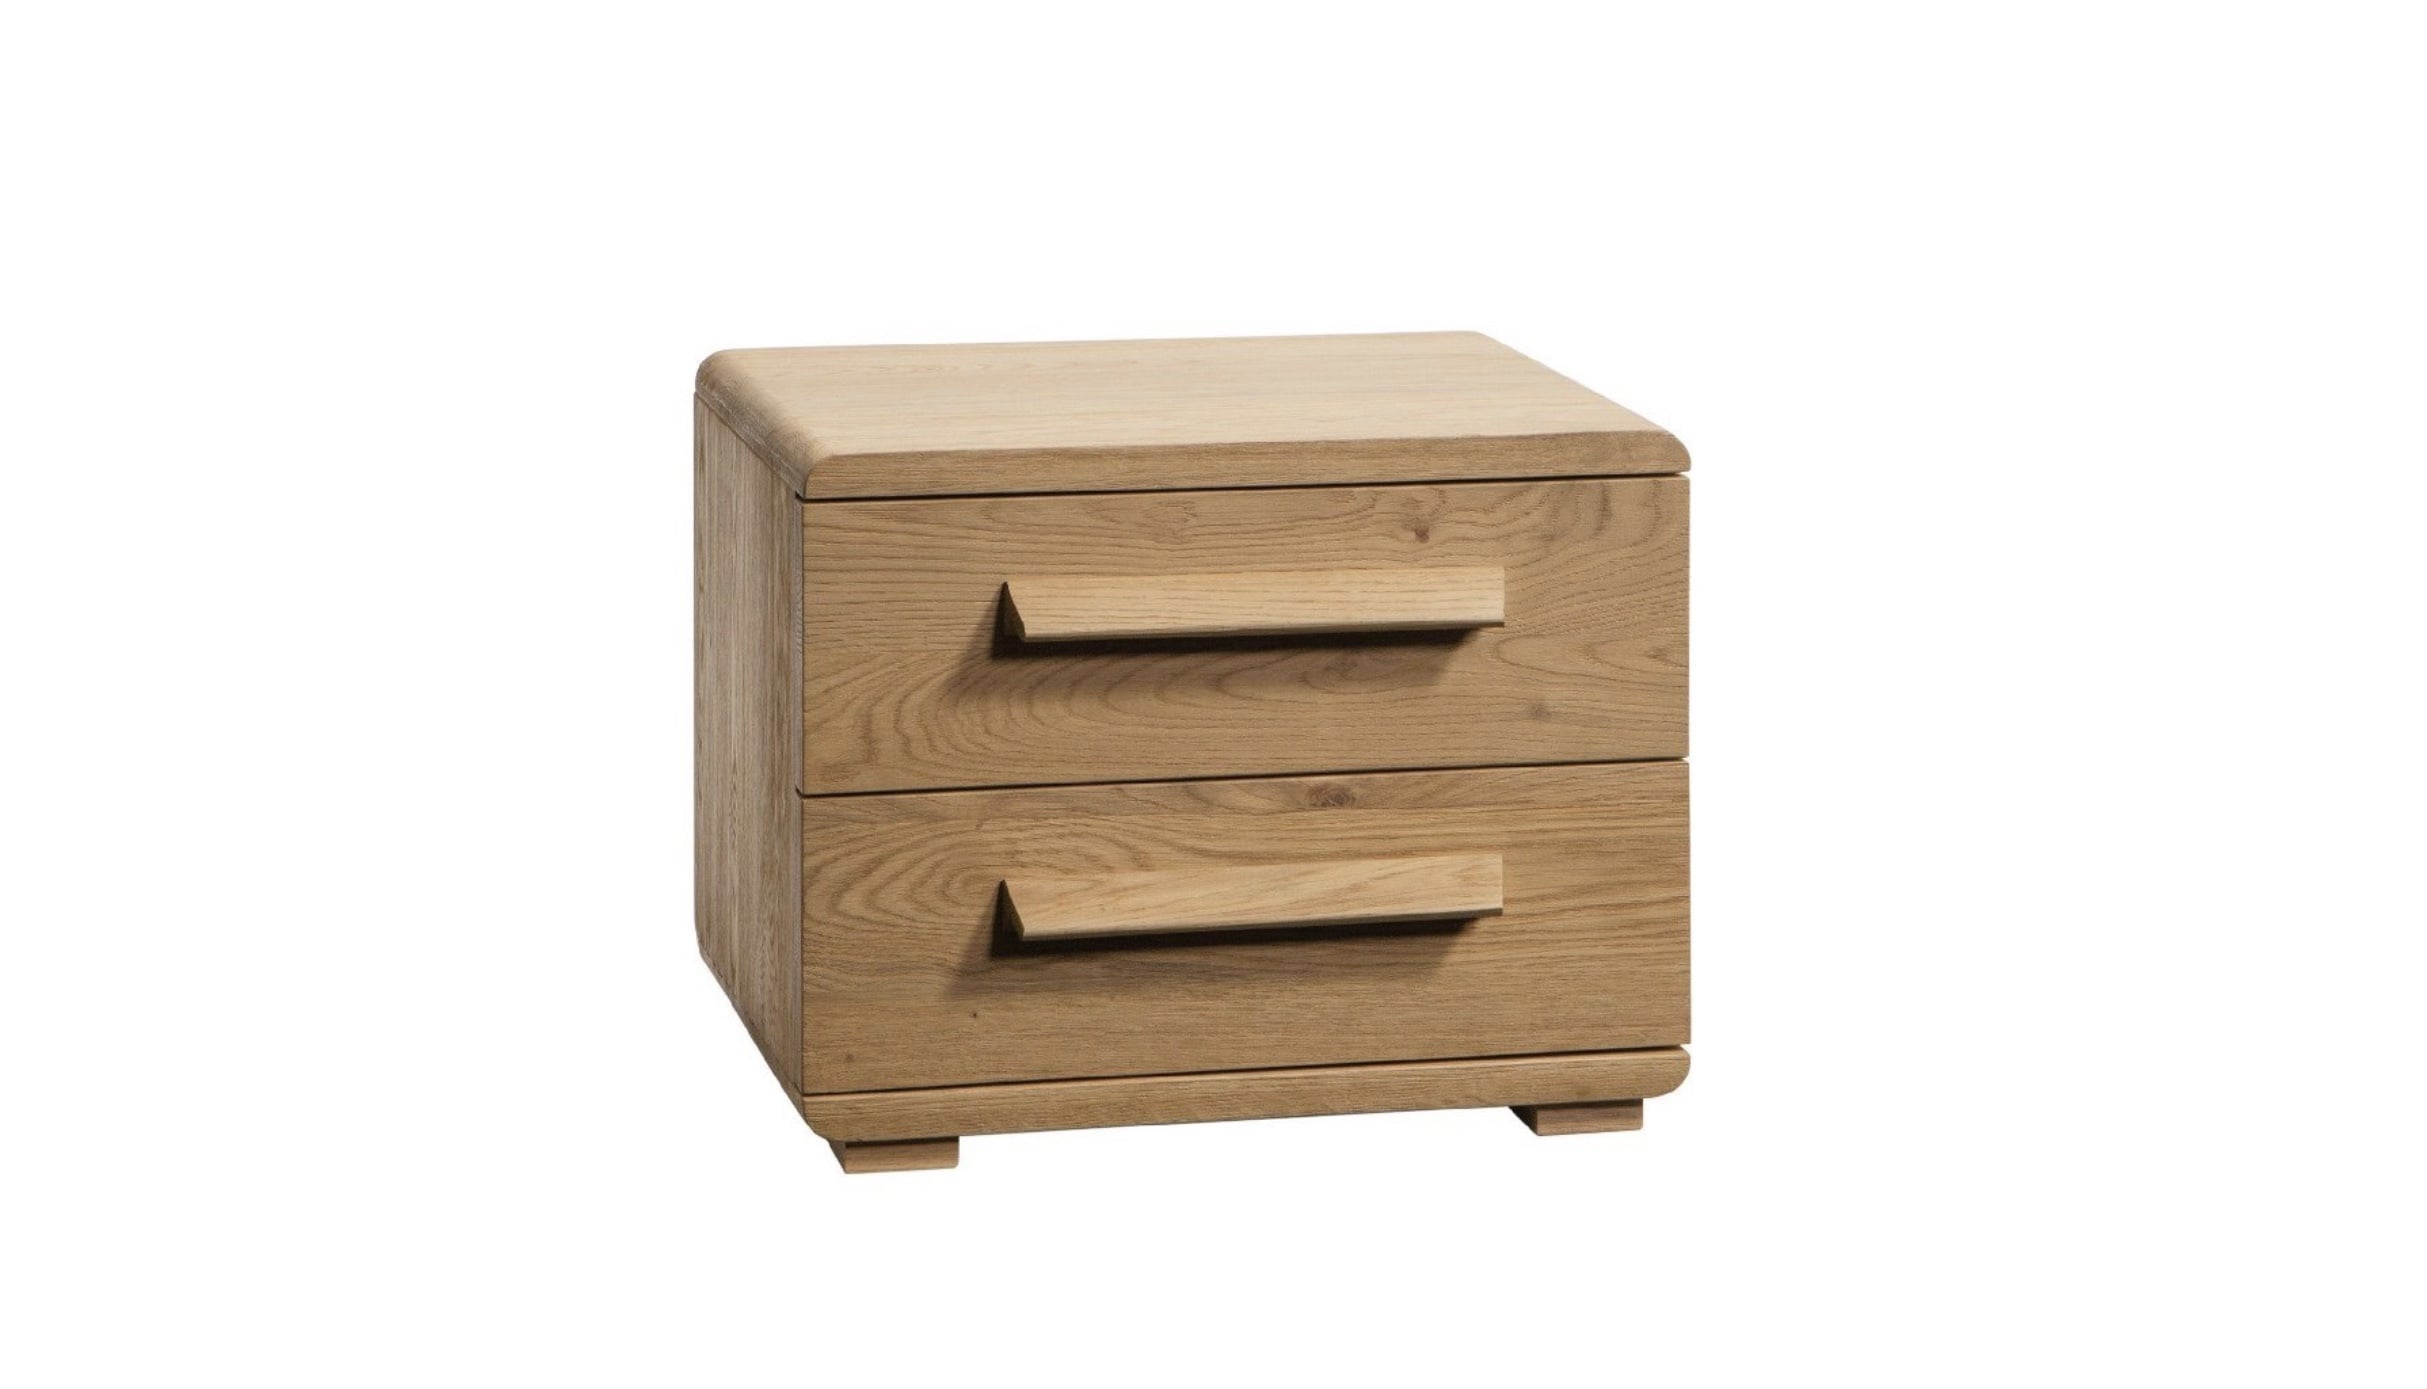 Made to Order Bedside Cabinets. - BSC 075-01